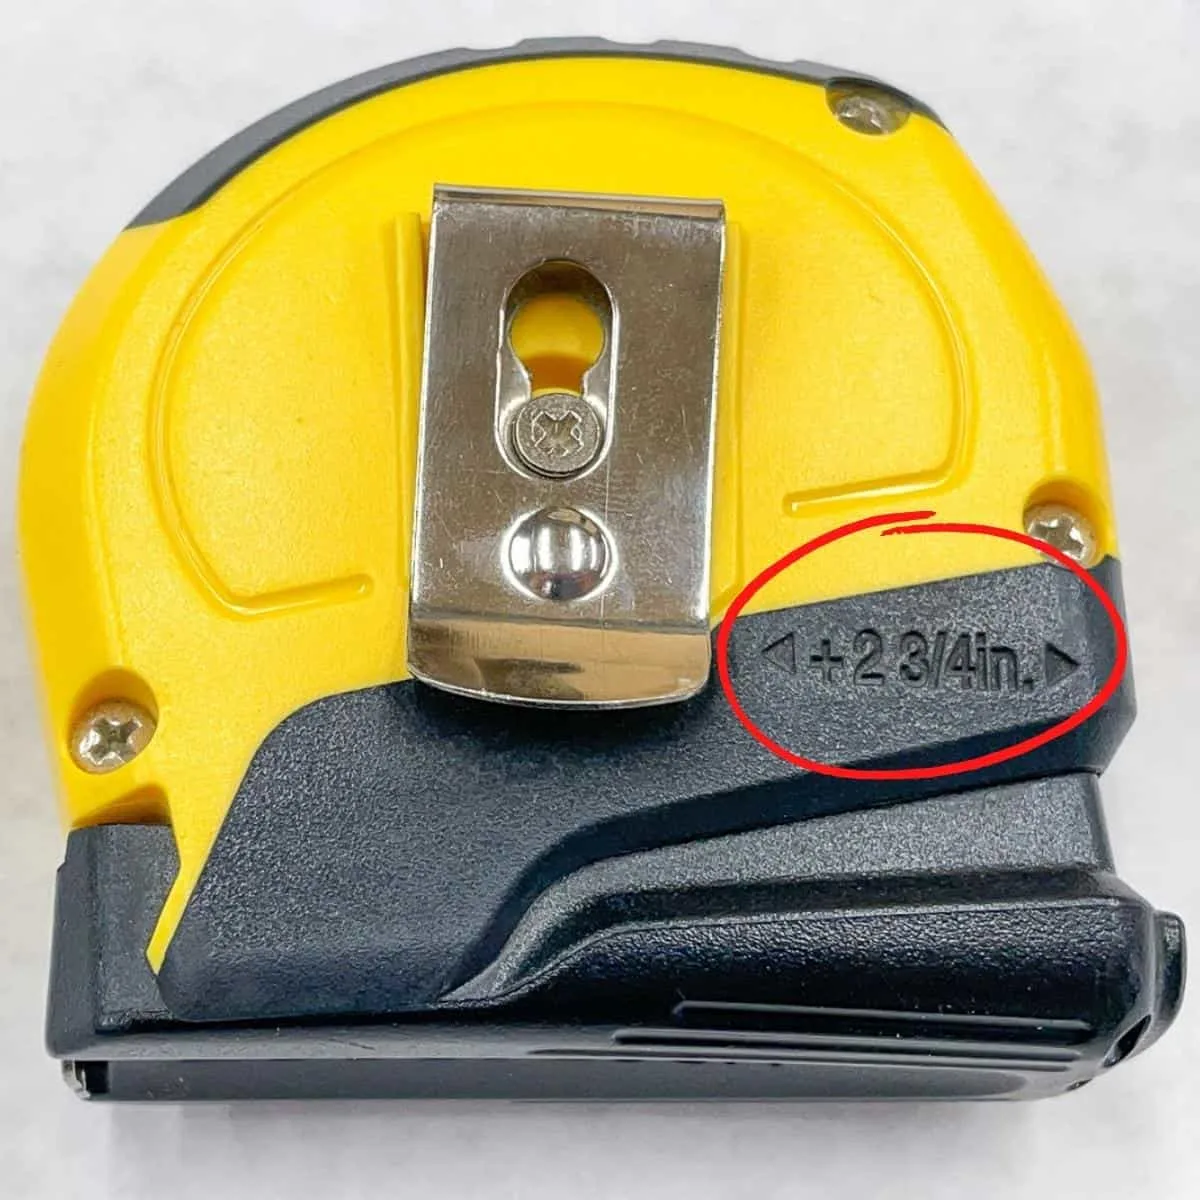 length of the tape measure housing circled